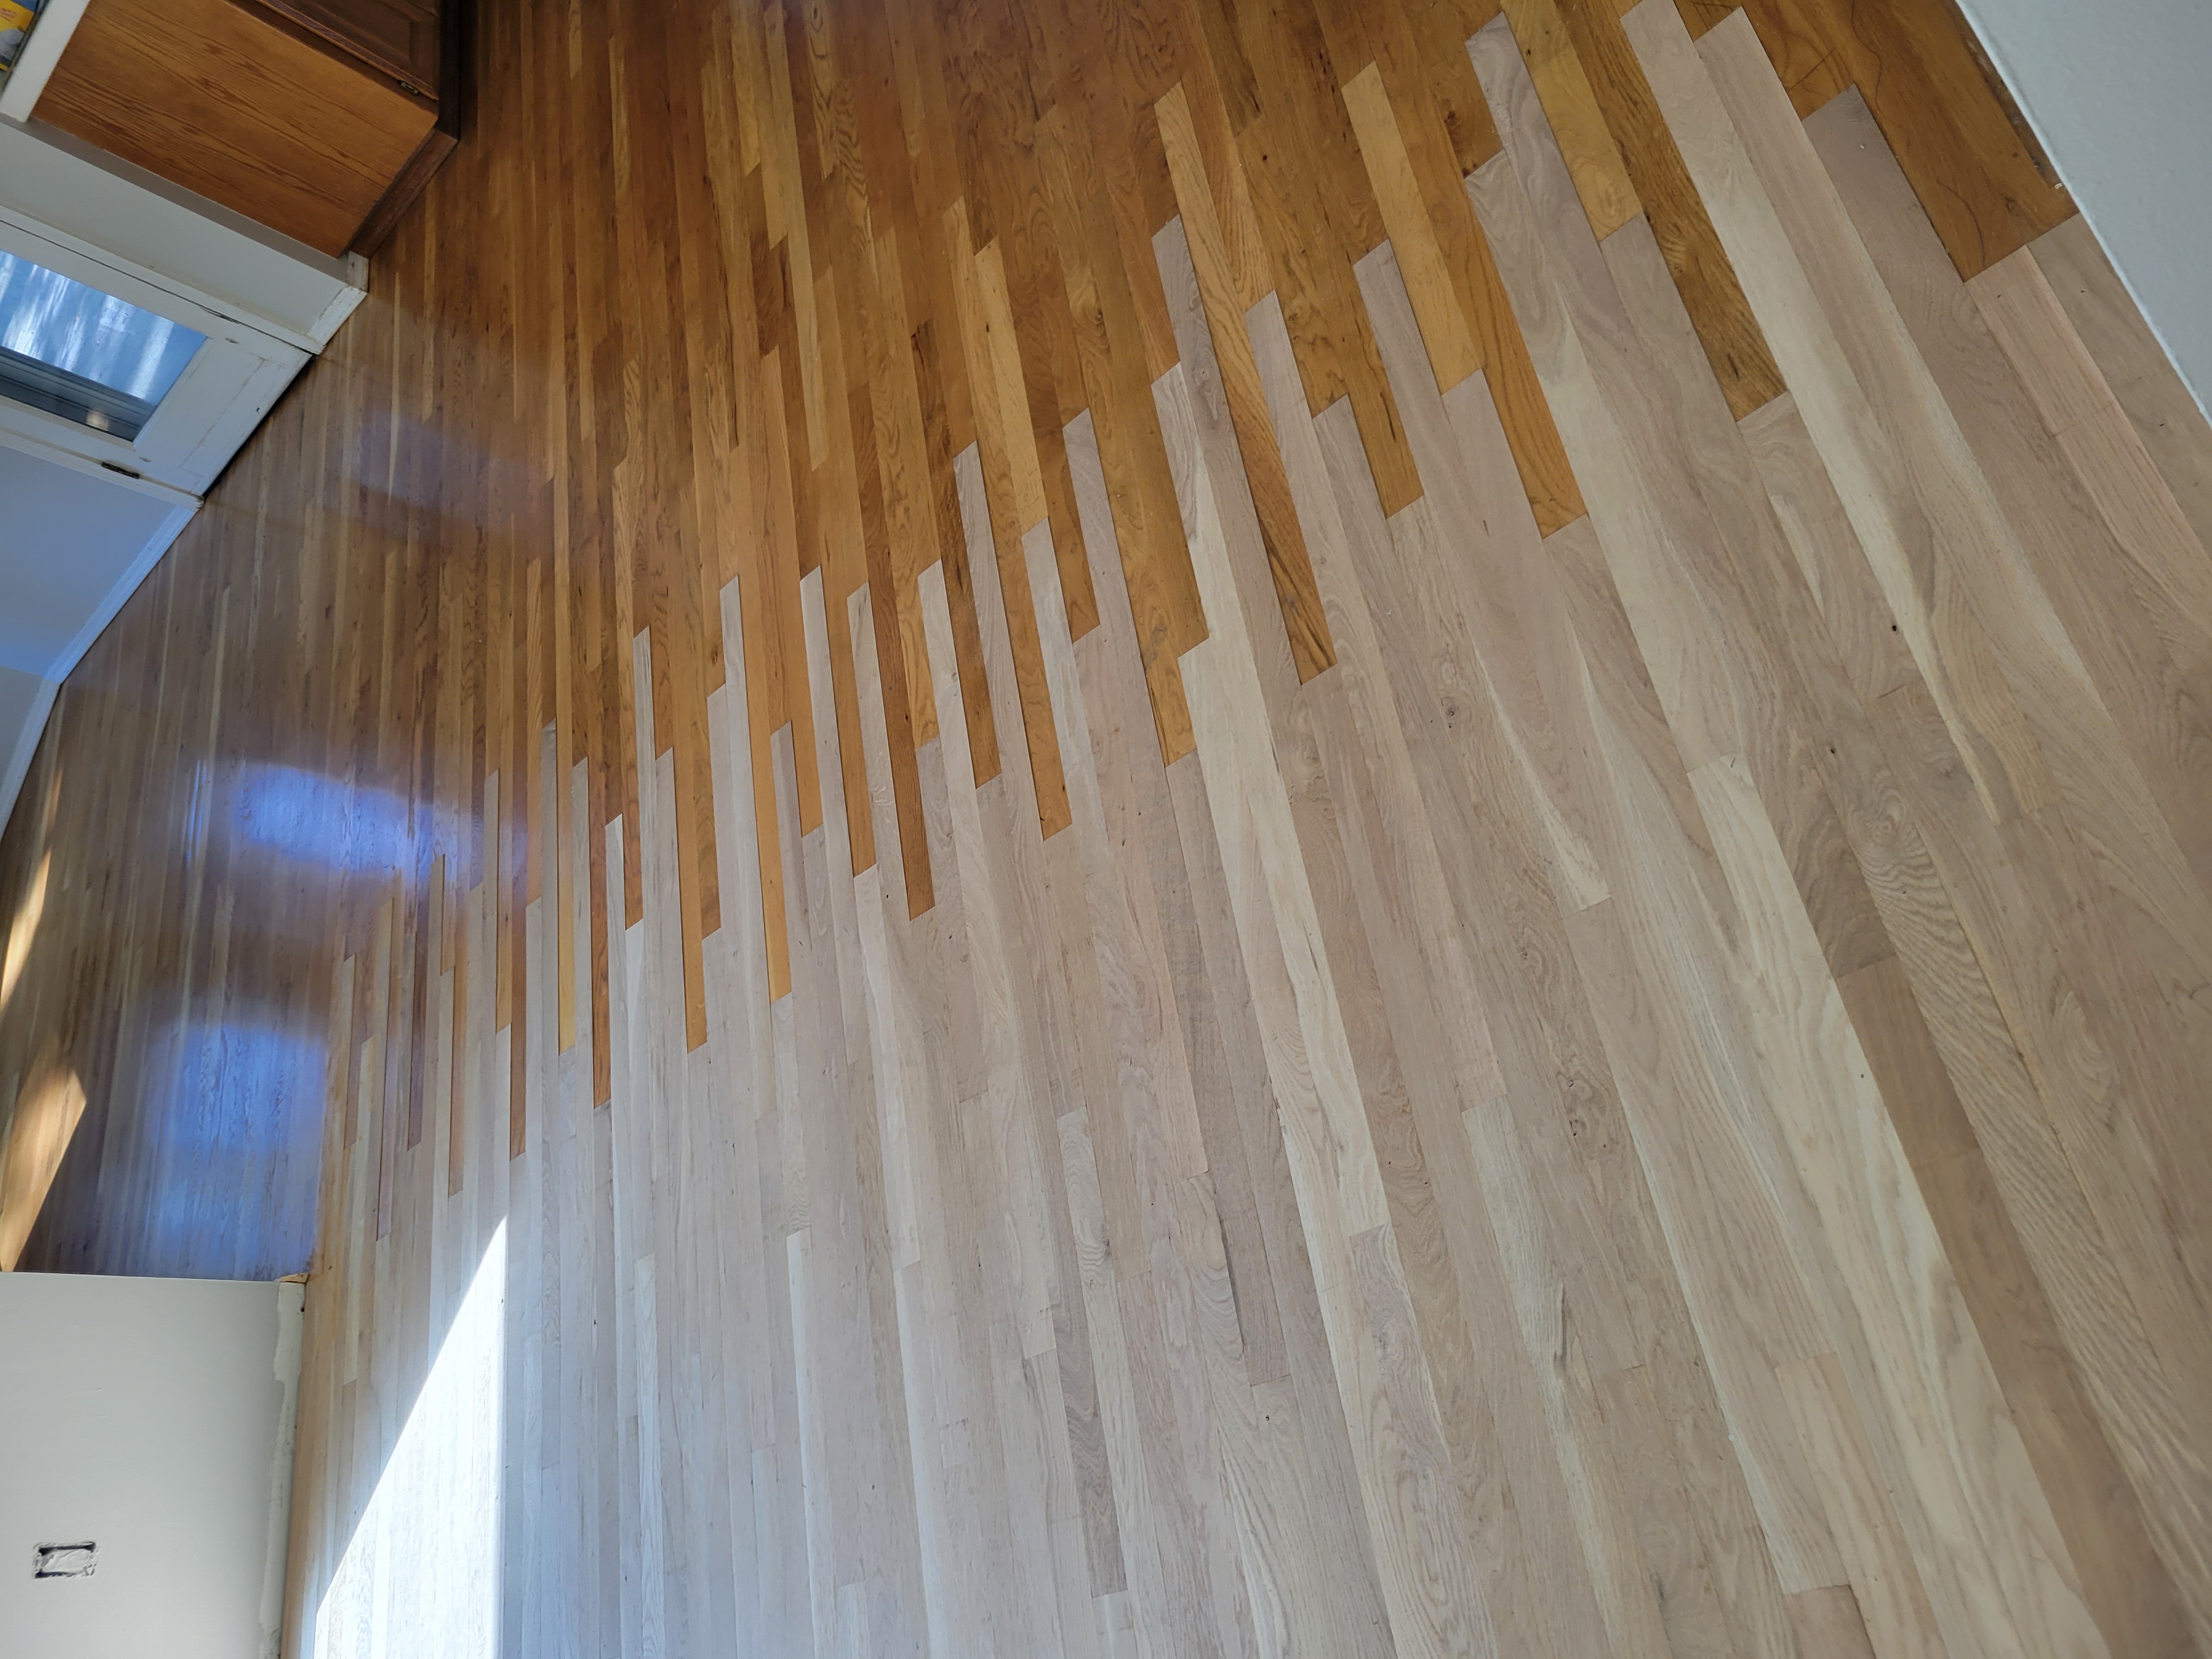 New red oak 2-1/4 x 3/4 flooring weaved into the existing red oak floor